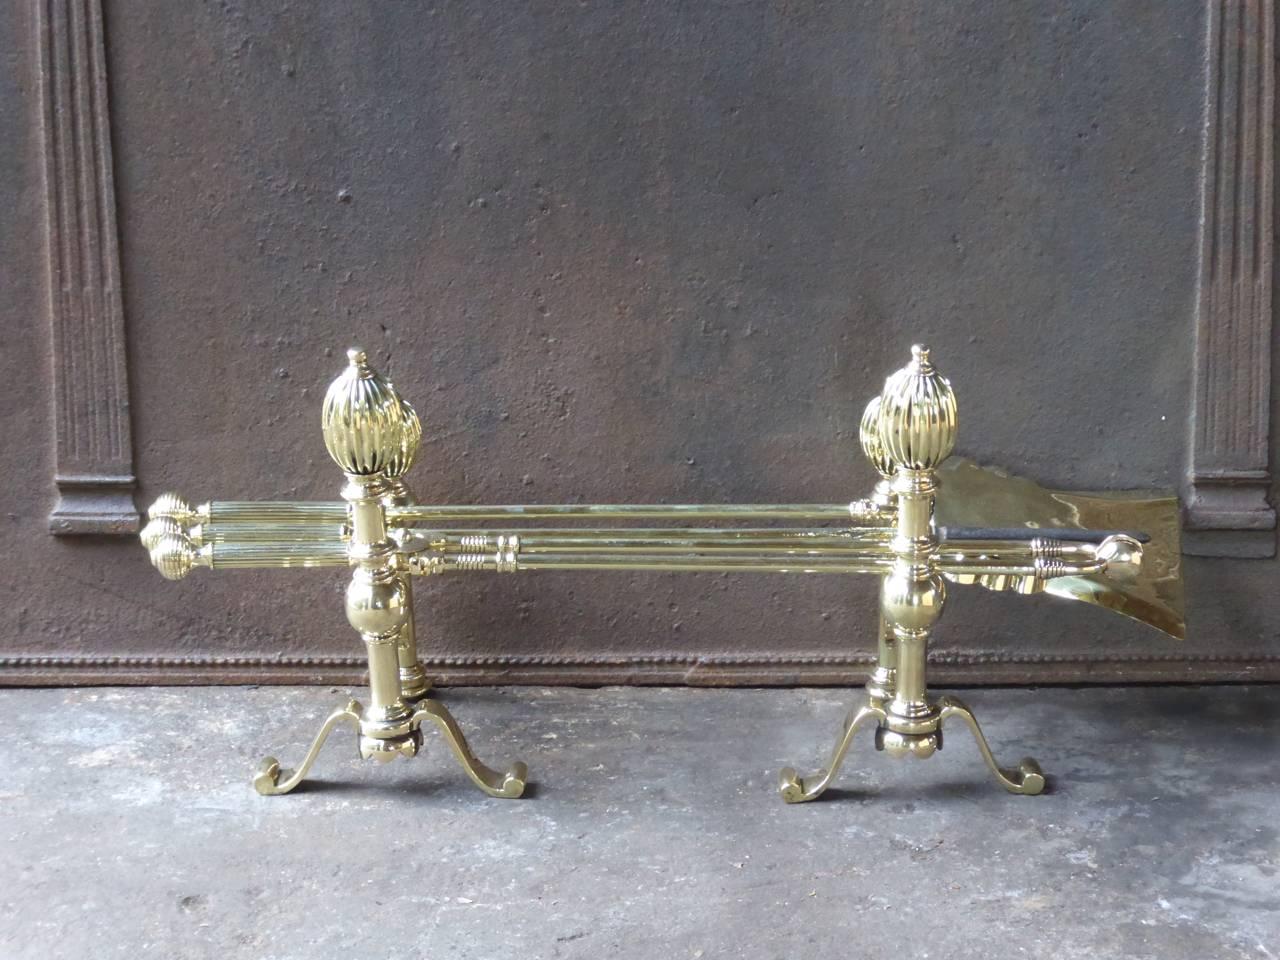 English fireplace tools, fire irons made of polished brass.

We have a unique and specialized collection of antique and used fireplace accessories consisting of more than 1000 listings at 1stdibs. Amongst others we always have 300+ firebacks, 250+